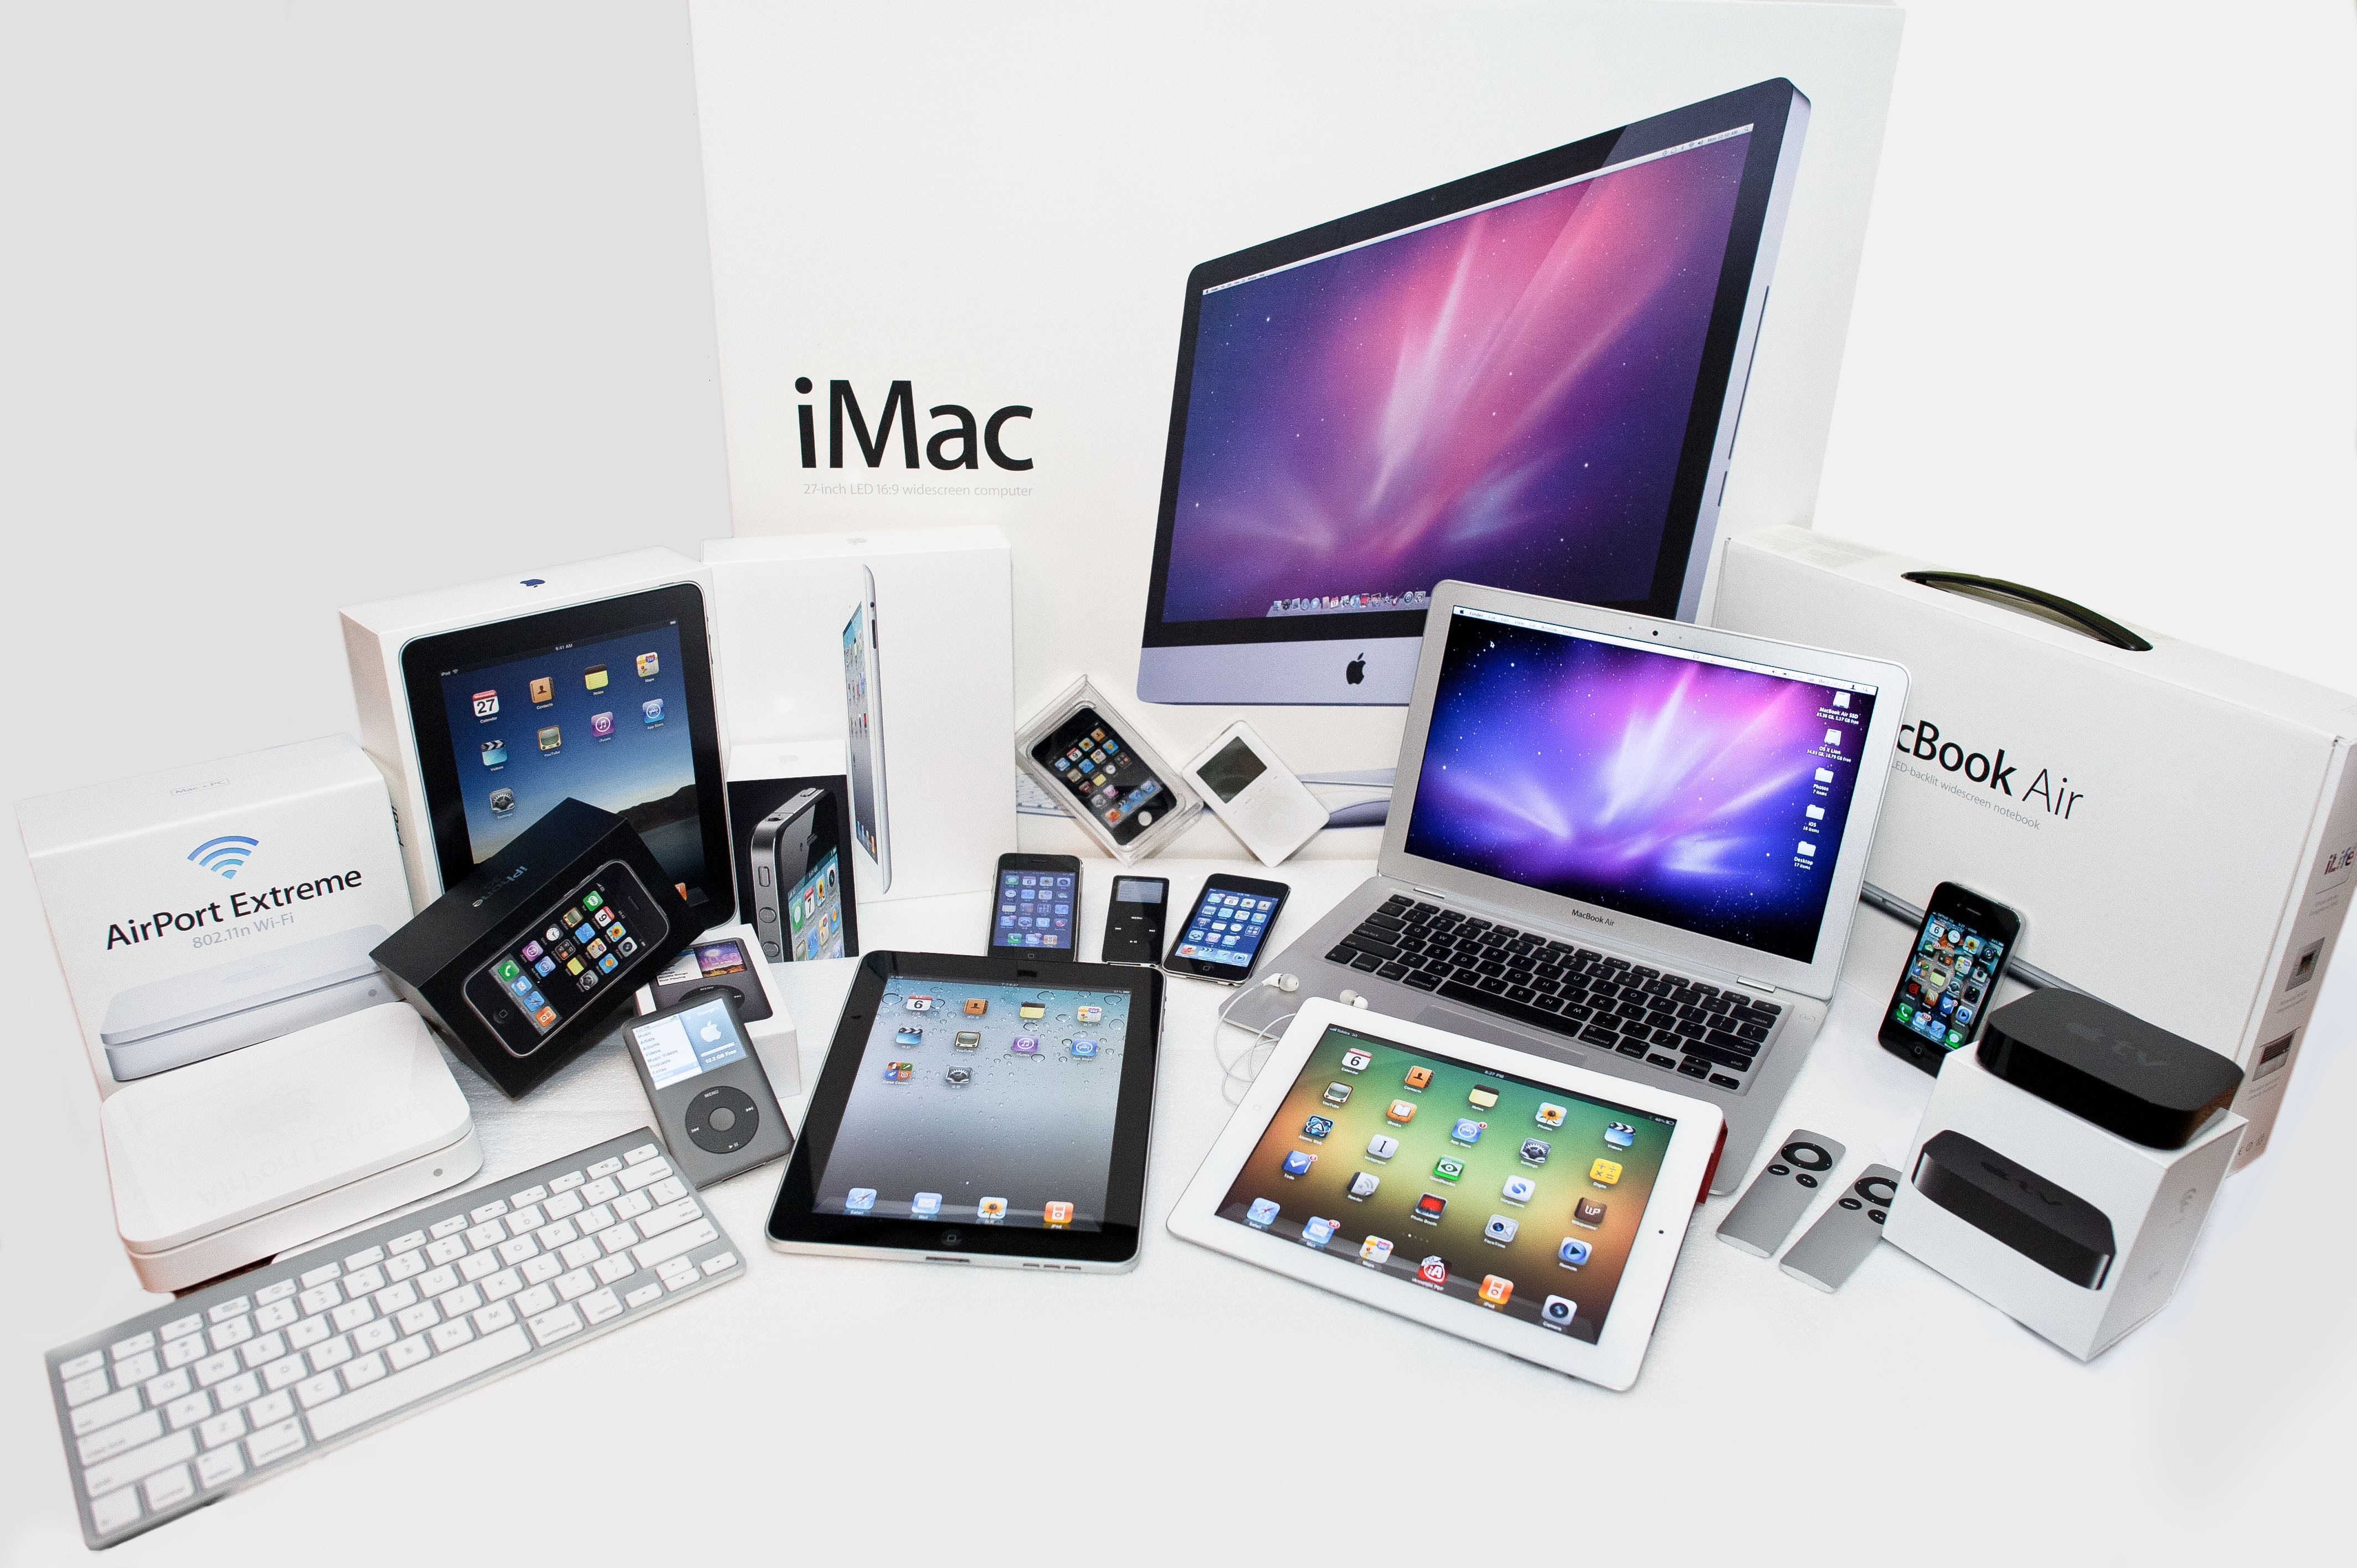 excessive amount of apple products | Flickr - Photo Sharing!